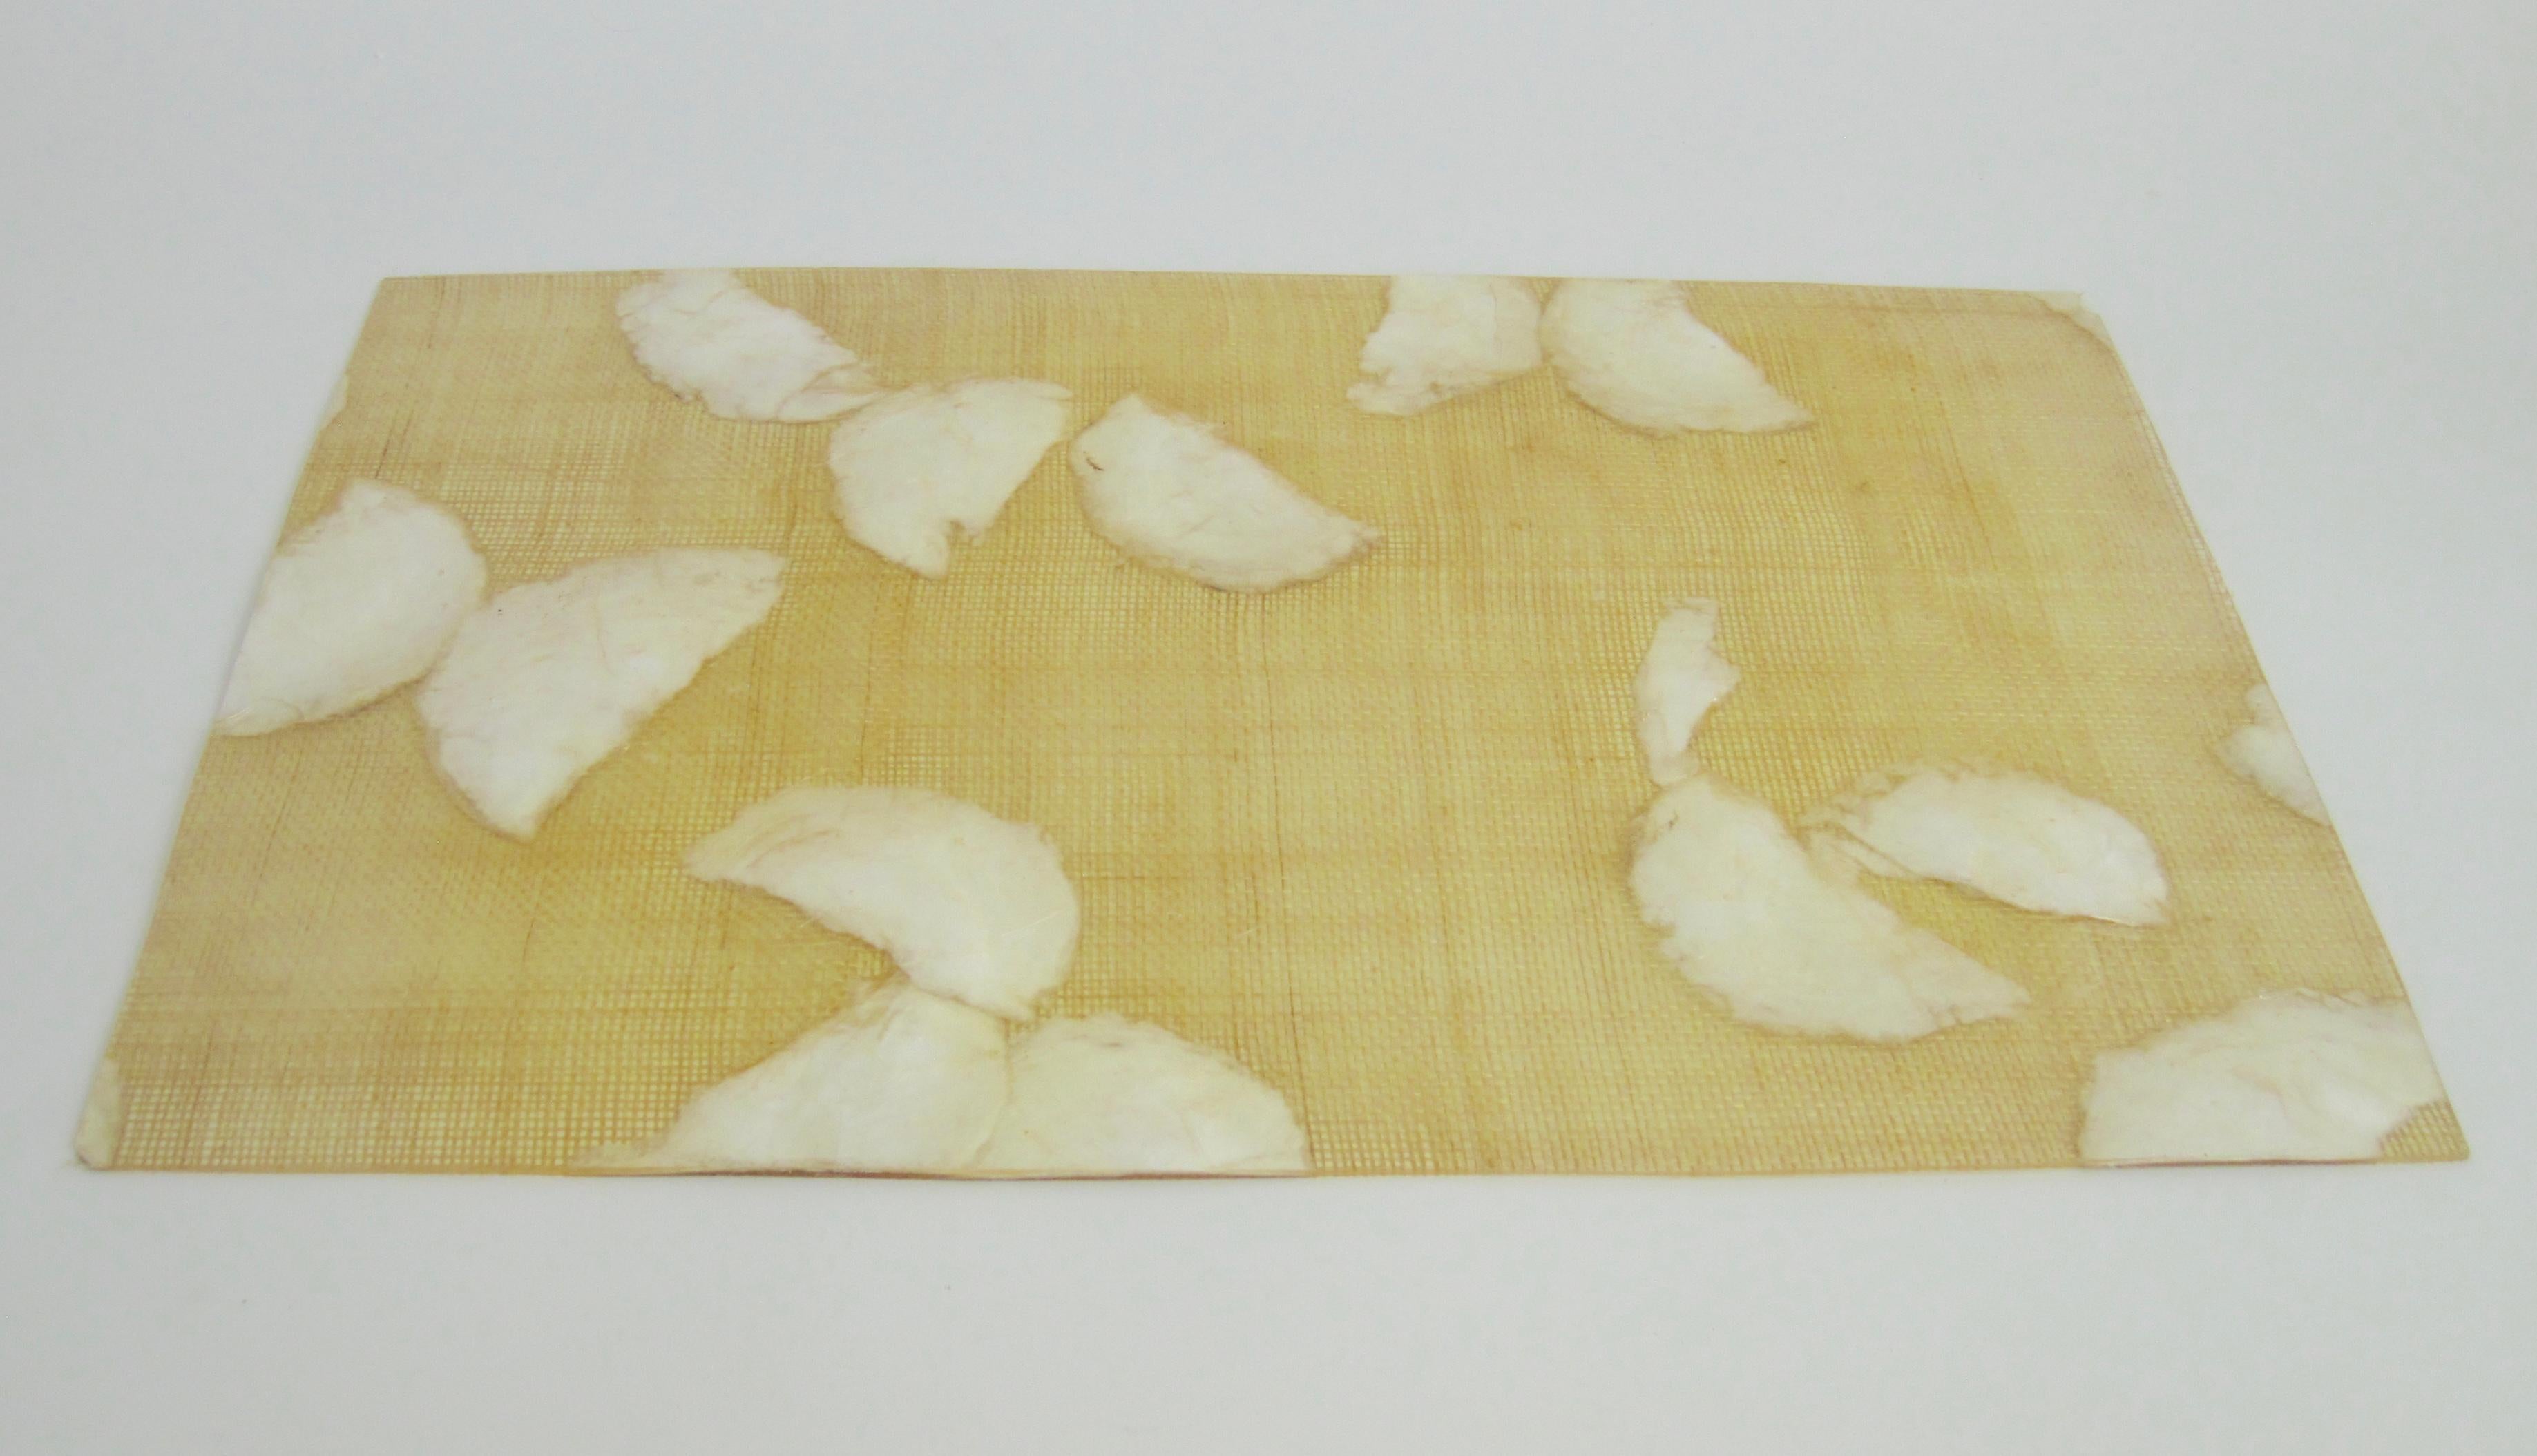 A set of twelve square resin, capiz shell and burlap placemats. Handmade in the 1970s, each placemat was crafted with capiz shell, a thin almost translucent shell found in the Indo-Pacific, between burlap and set in resin. Each one is unique. 